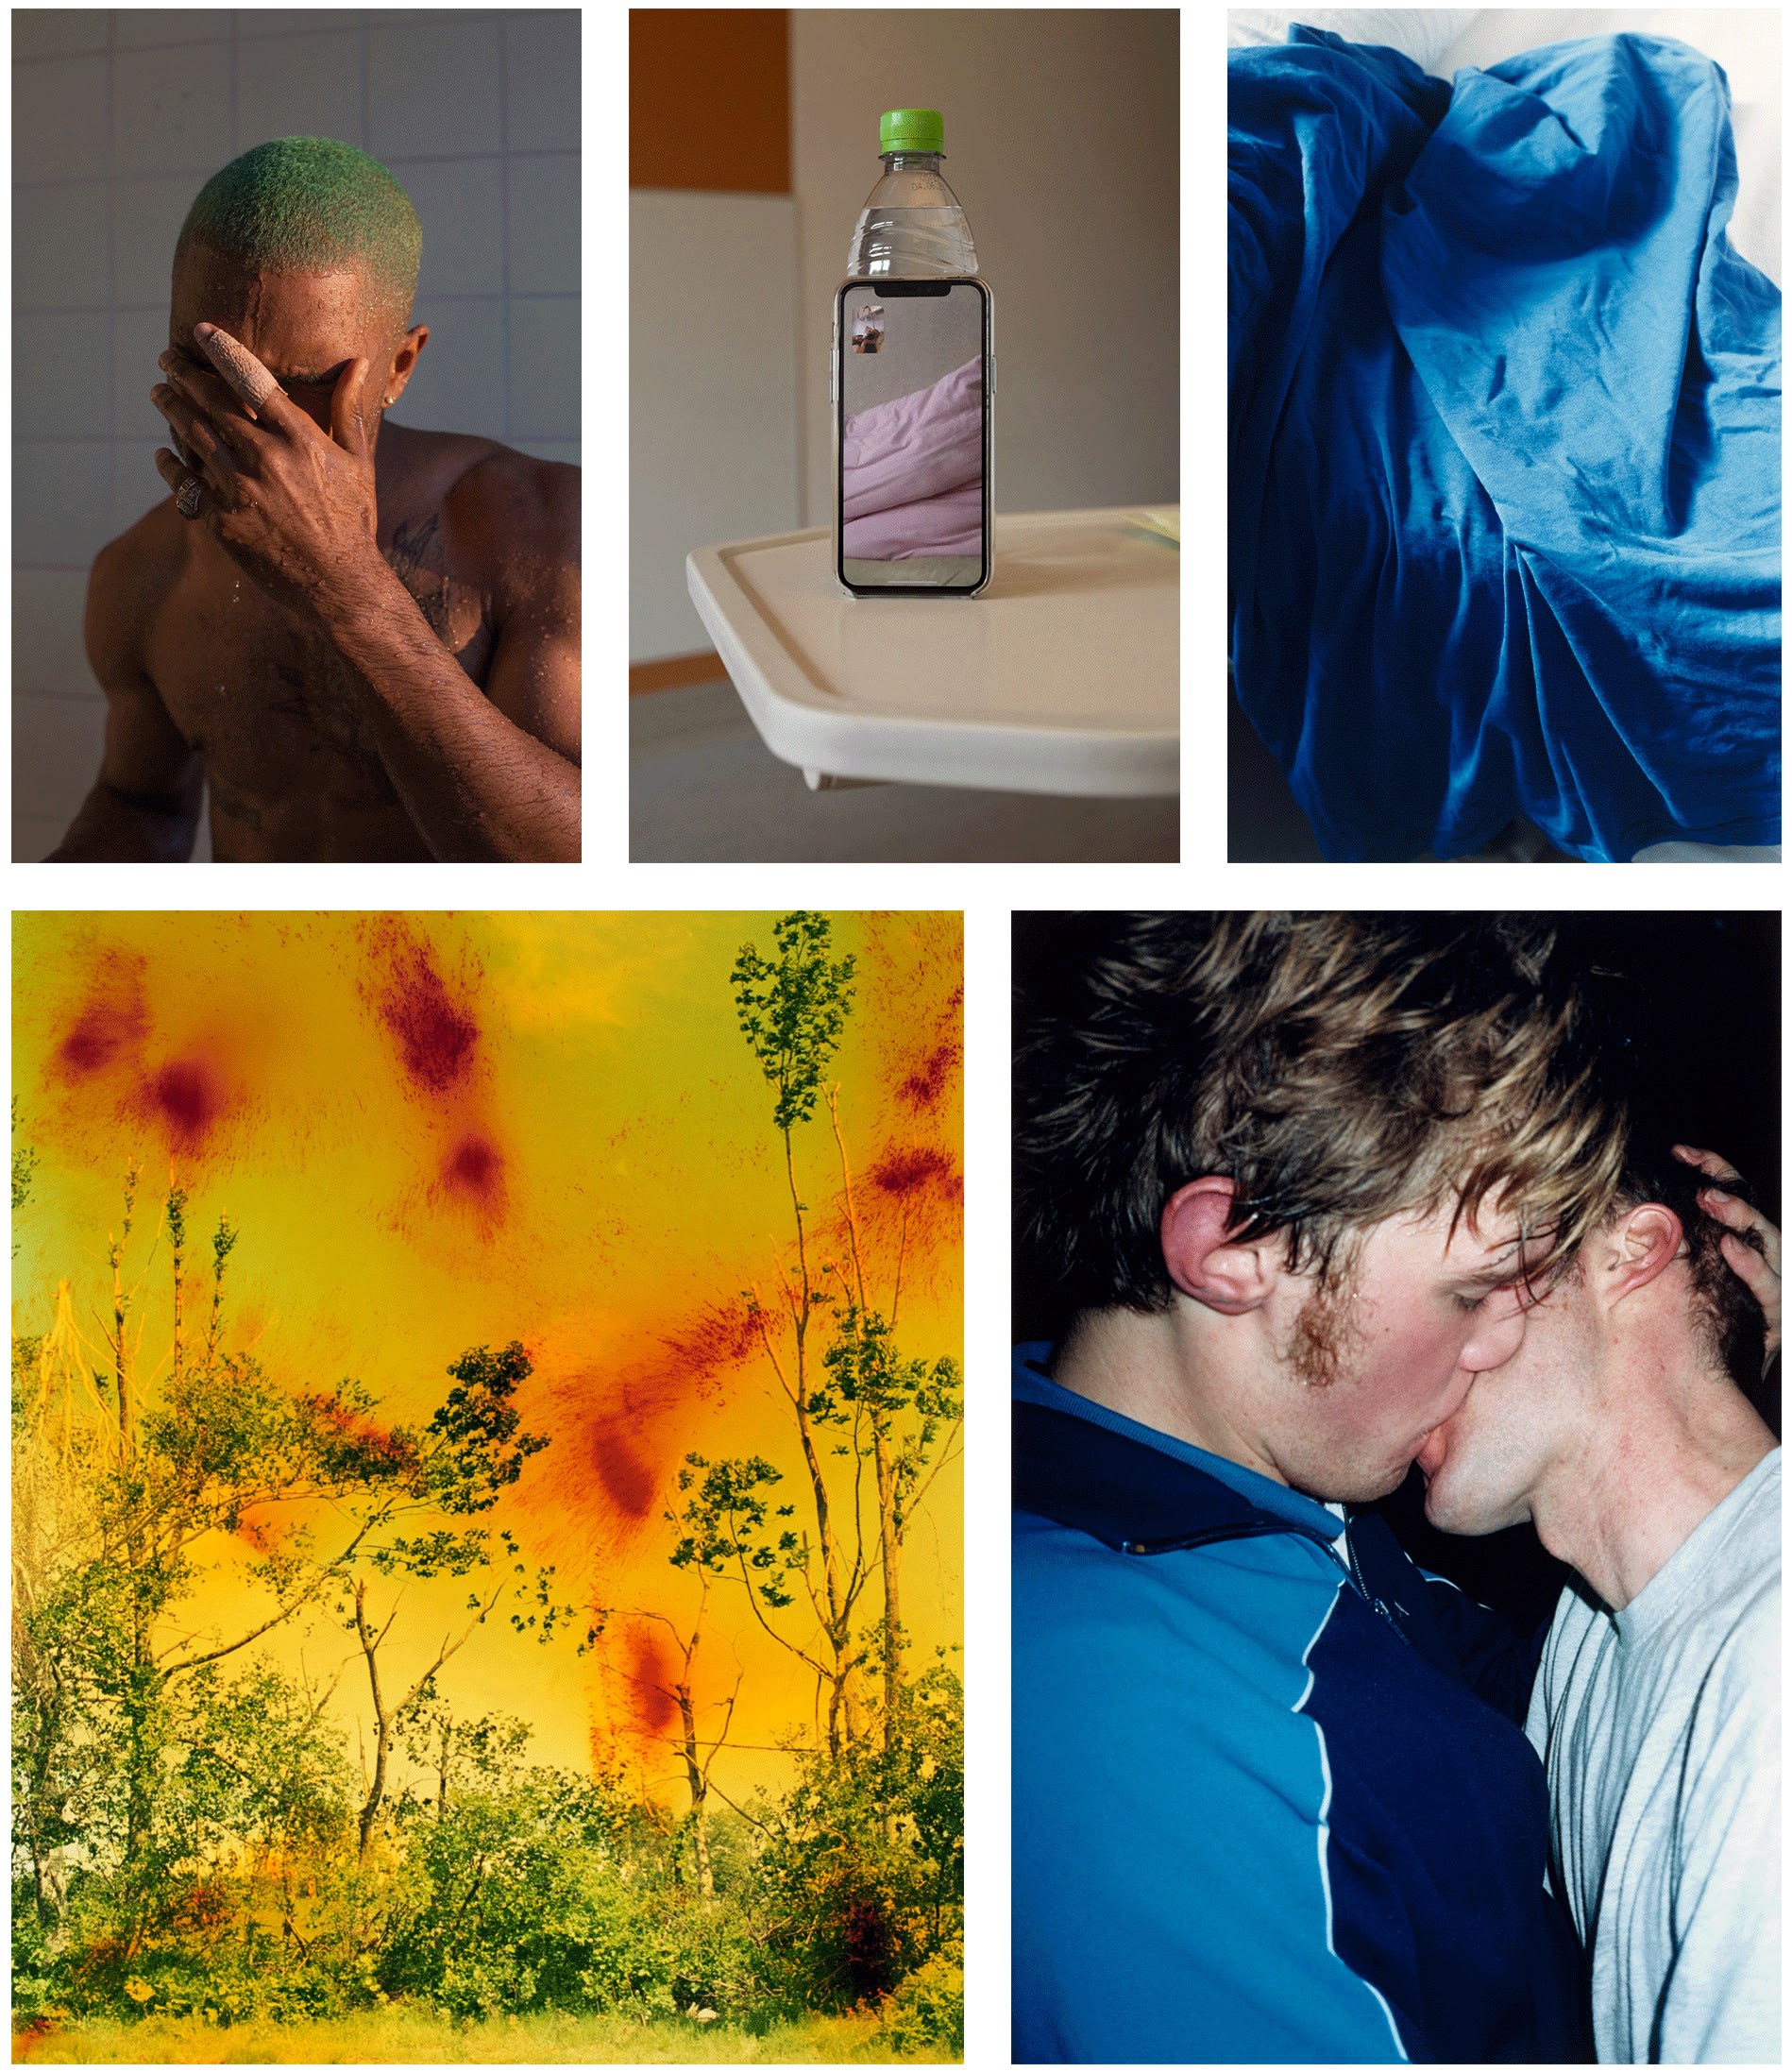 Left to right, top to bottom, all photos by Wolfgang Tillmans, courtesy of the artist and David Zwirner, New York and Hong Kong, Galerie Buchholz, Berlin and Cologne, Maureen Paley, London : 1. Frank, in the shower (2015). 2. Lüneburg (self) (2020). 3. Faltenwurf (skylight) (2009). 4. Icestorm (2001). 5. The Cock (kiss) (2002).